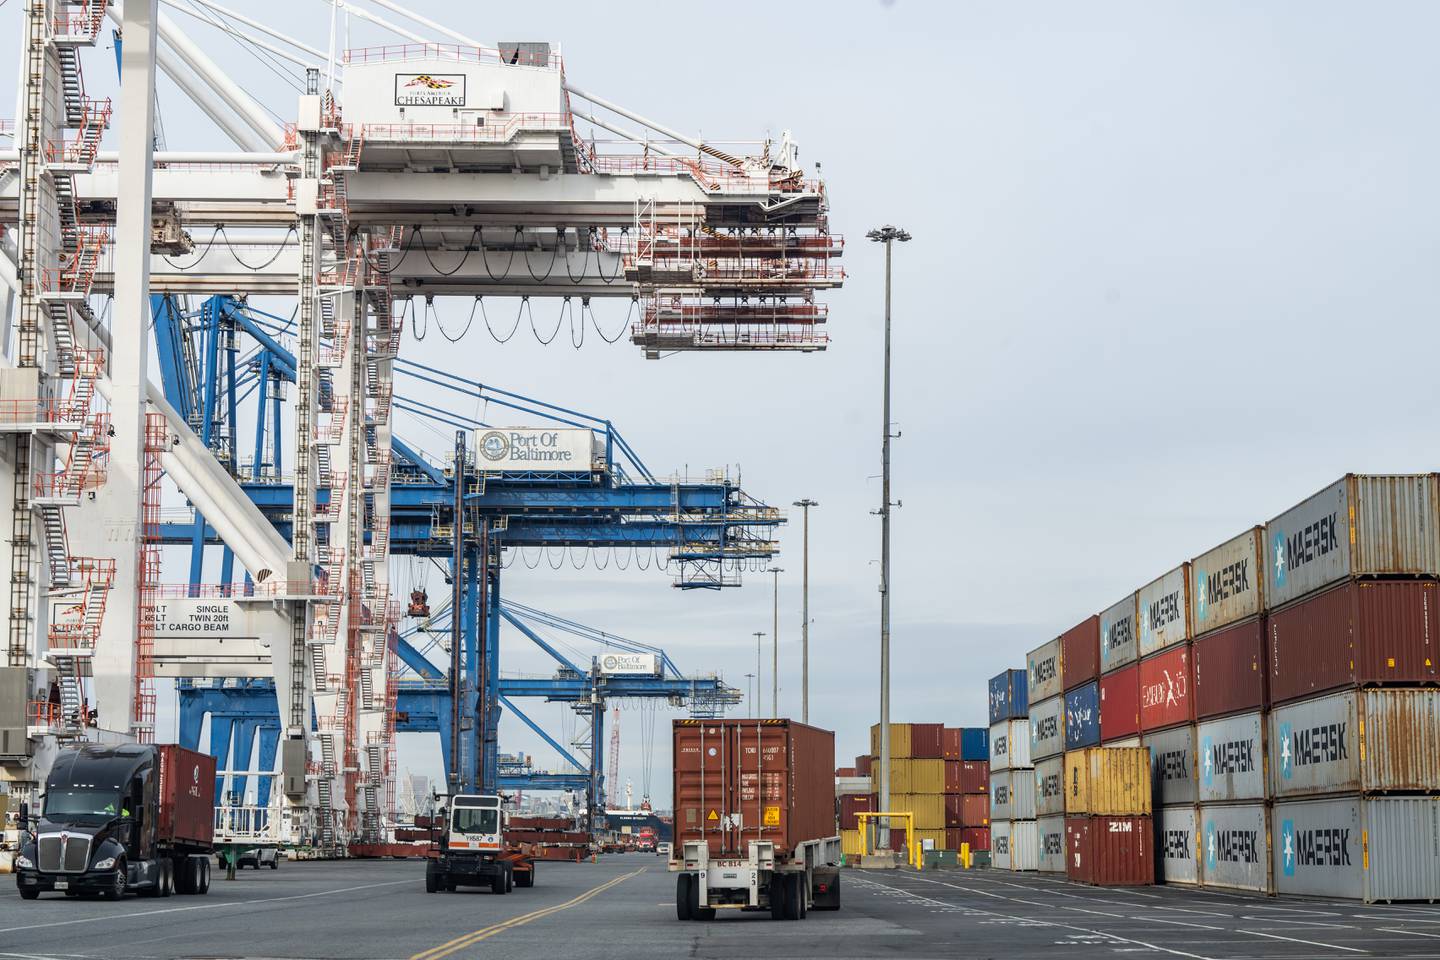 Trucks navigate through the Dundalk Marine Terminal. Cranes line the left side of the frame and shipping containers are stacked on the right.